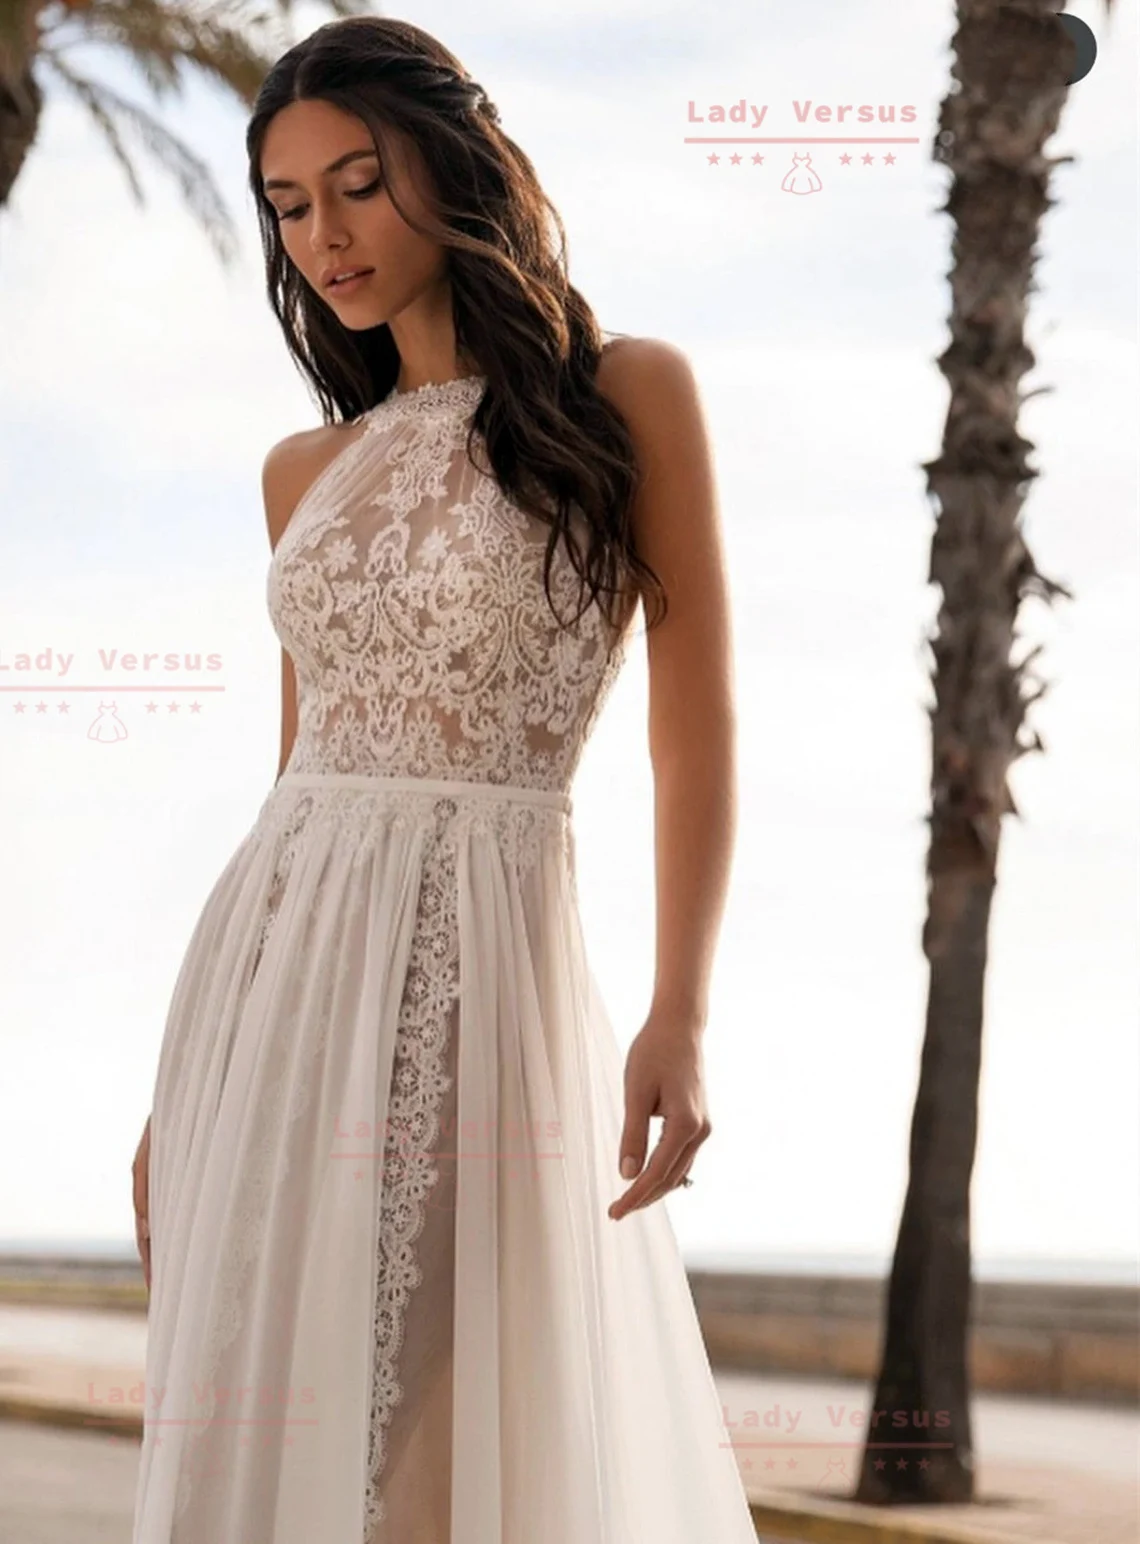 lace halter neck dress with tulle skirt